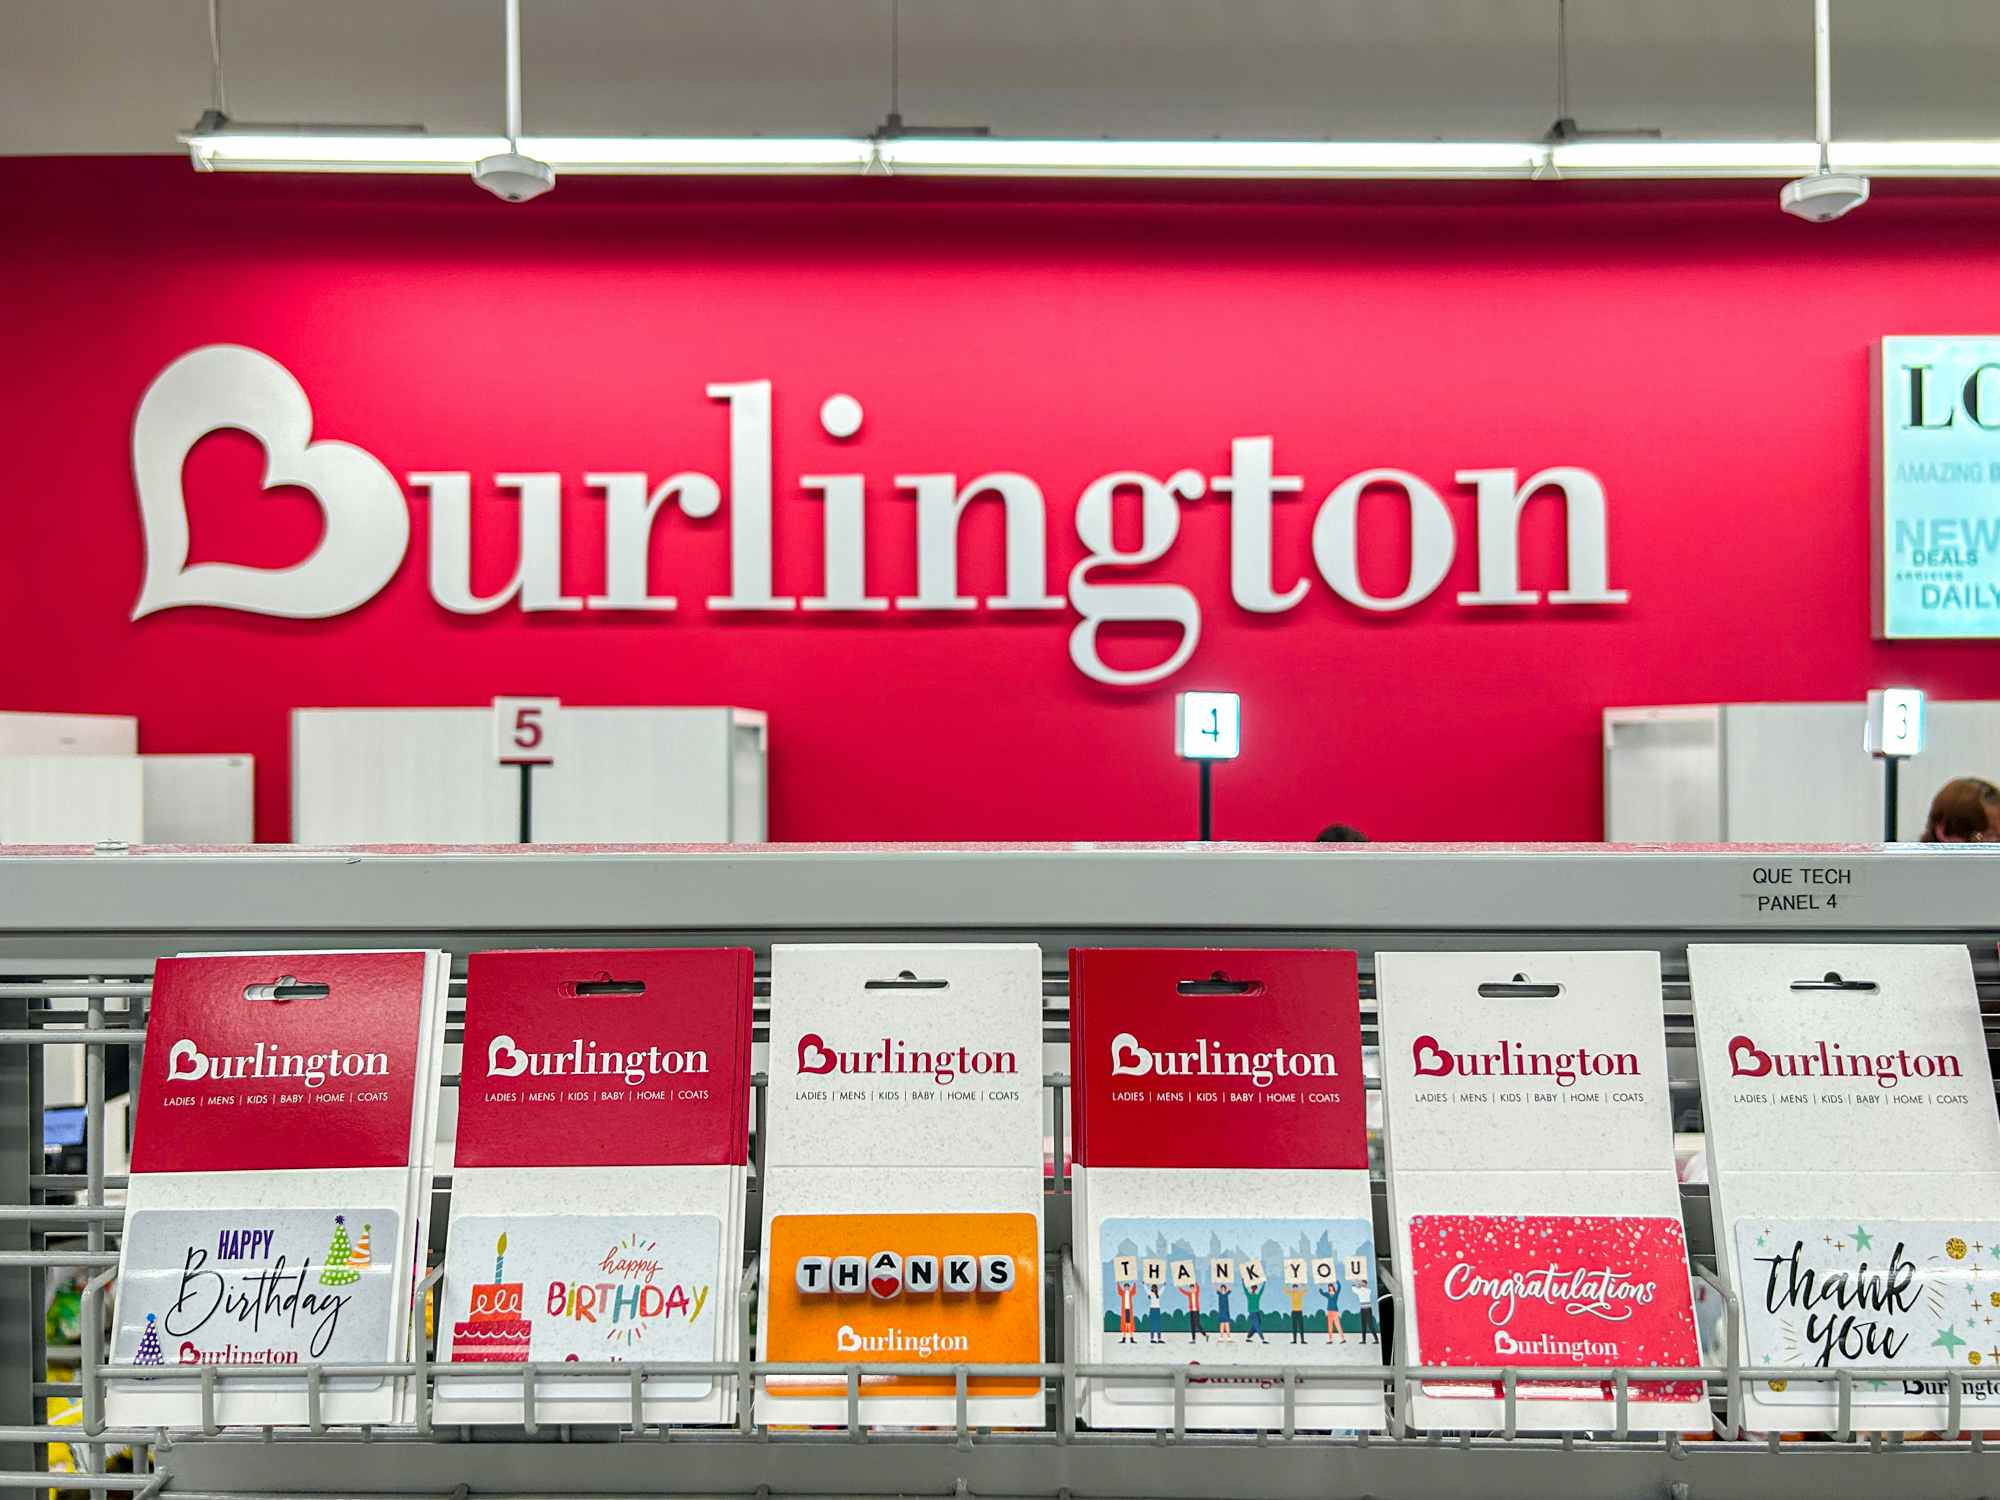 burlington gift cards with a burlington store sign in the background